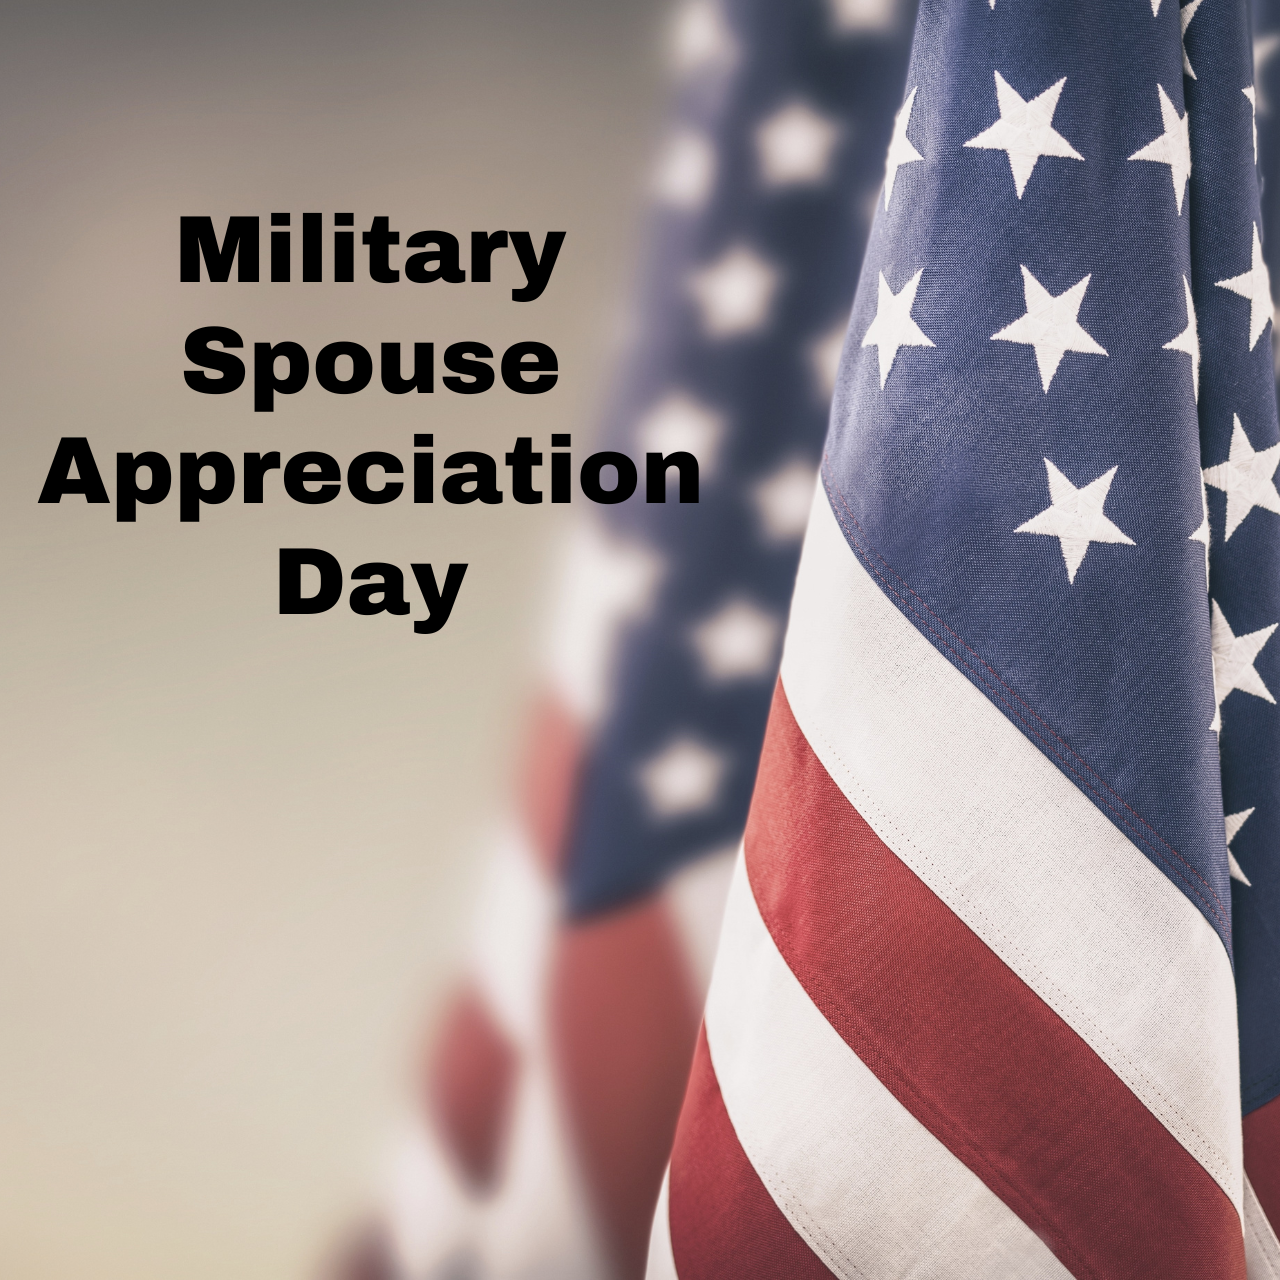 Military Spouse Appreciation Day 2023 Quotes, Memes, Images, Messages, Greetings, Wishes, Sayings, Posters, Banners and Slogans